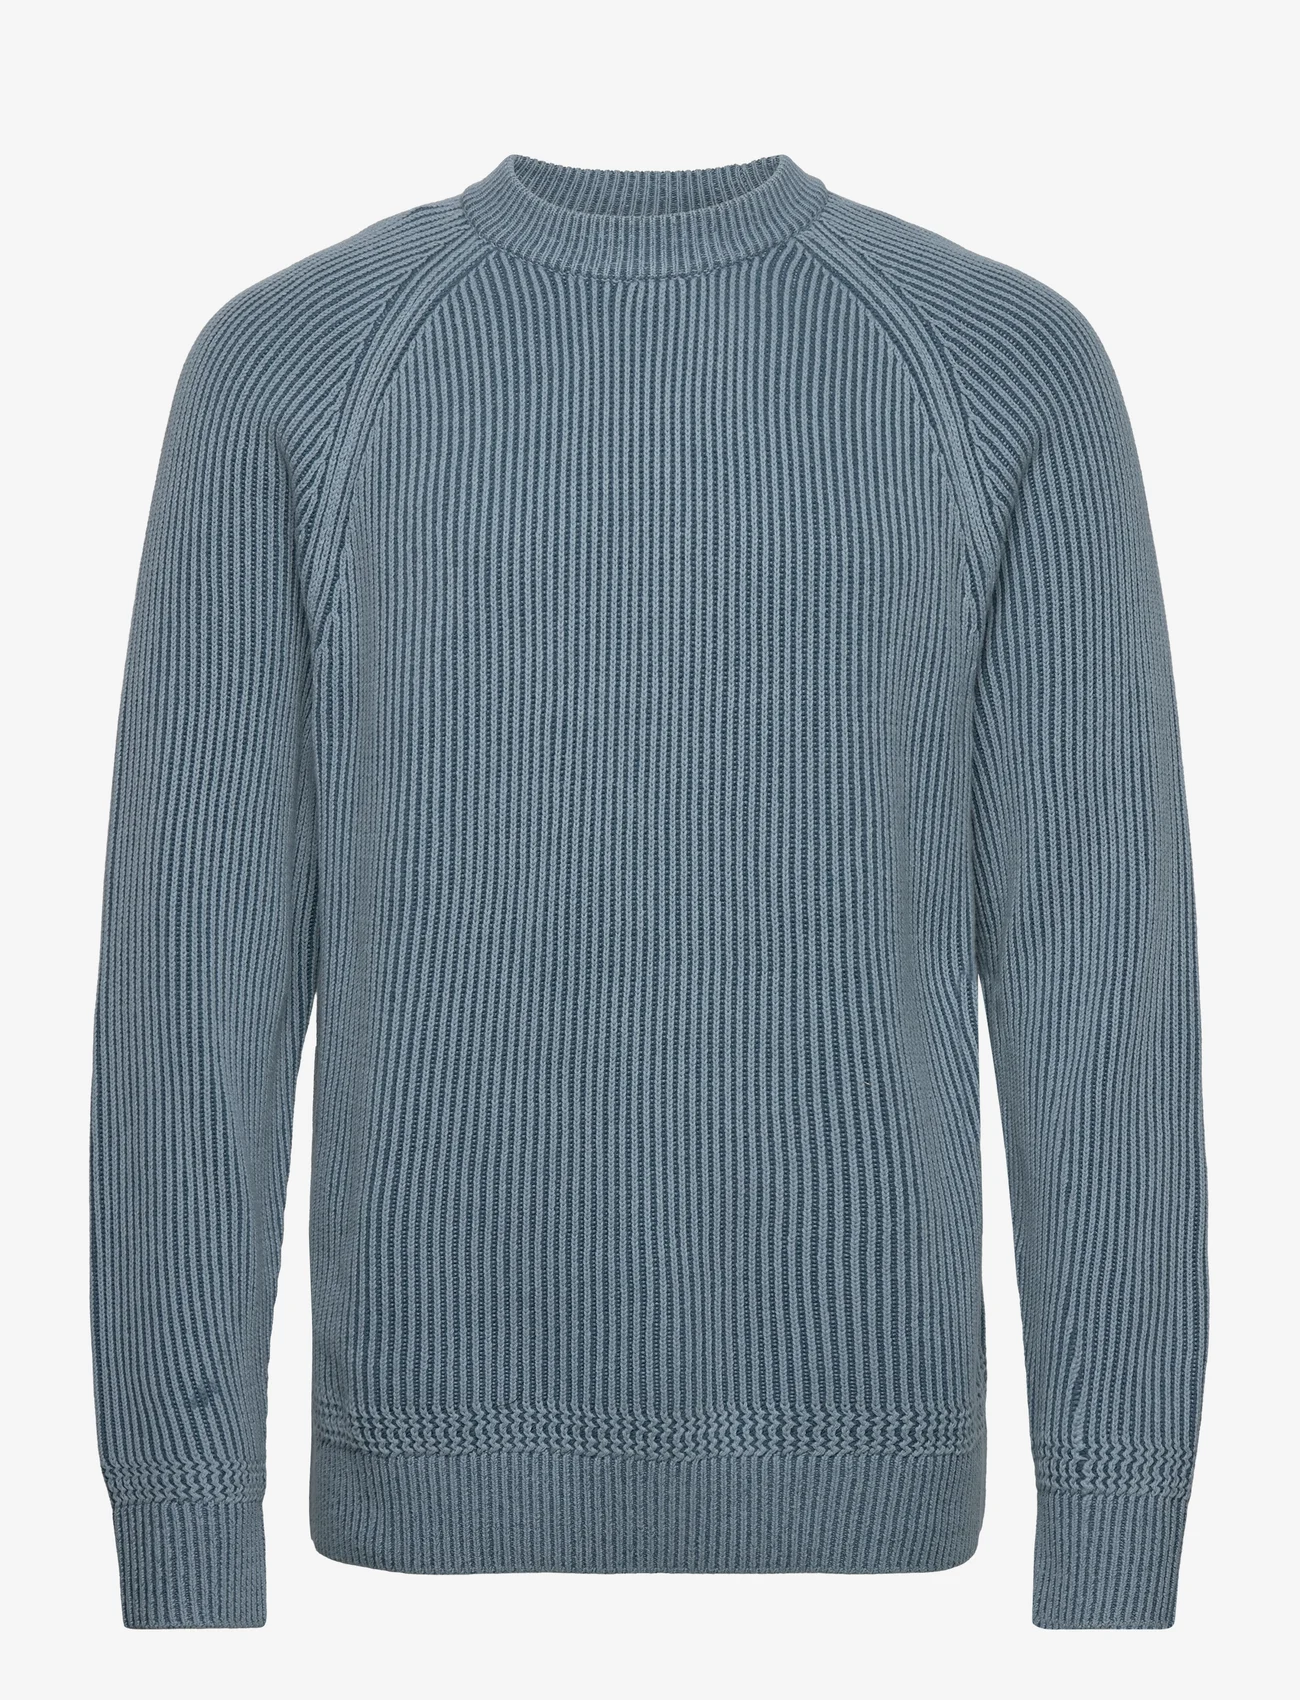 Abercrombie & Fitch - ANF MENS SWEATERS - rundhals - citadel/stargazer - 0